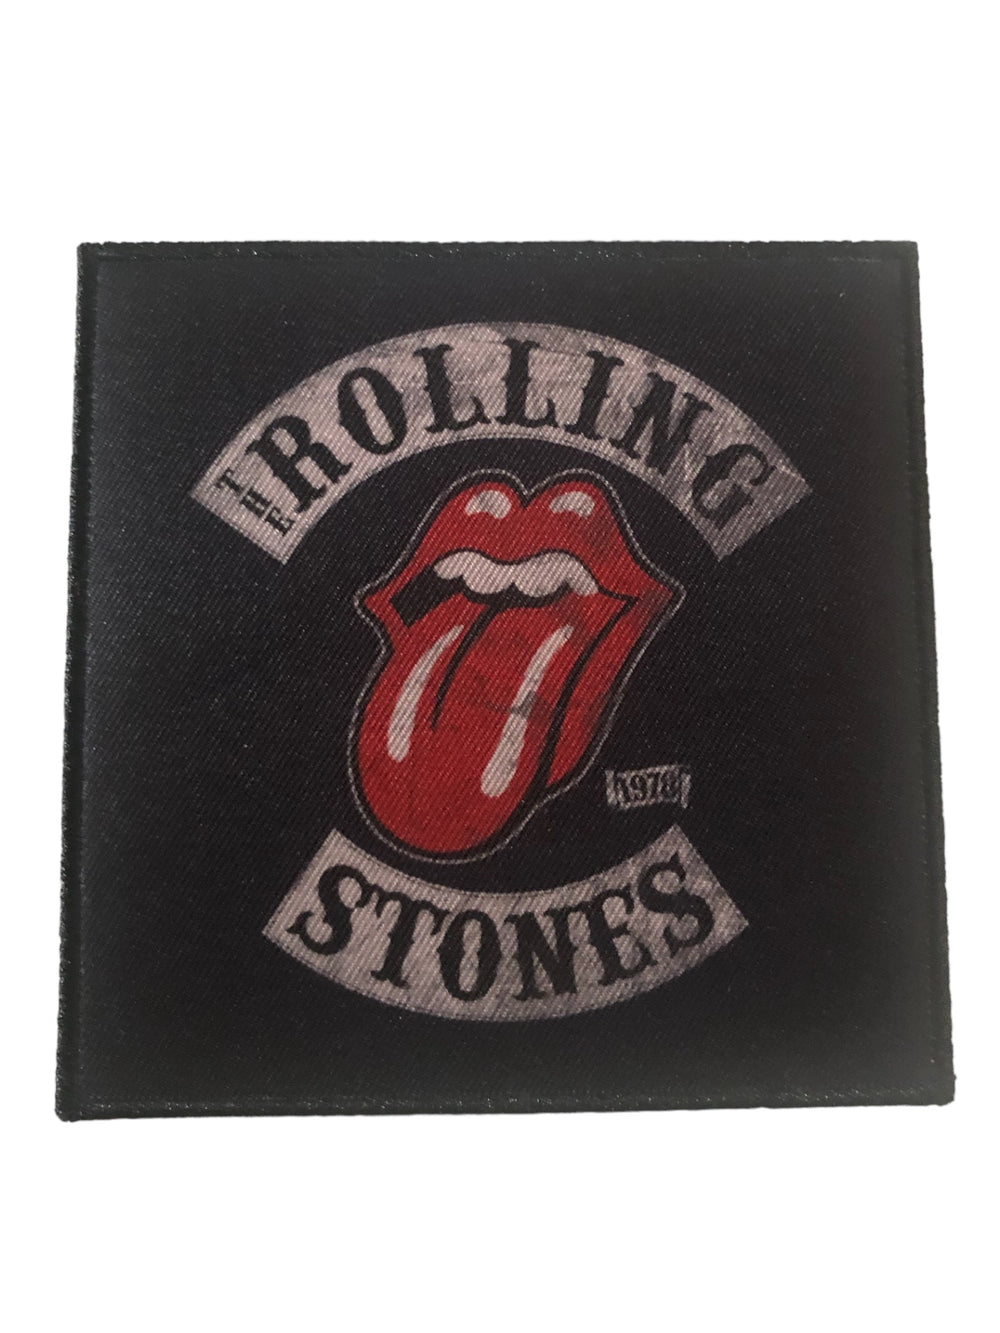 Rolling Stones Tour 78 Official Woven Patch Brand New